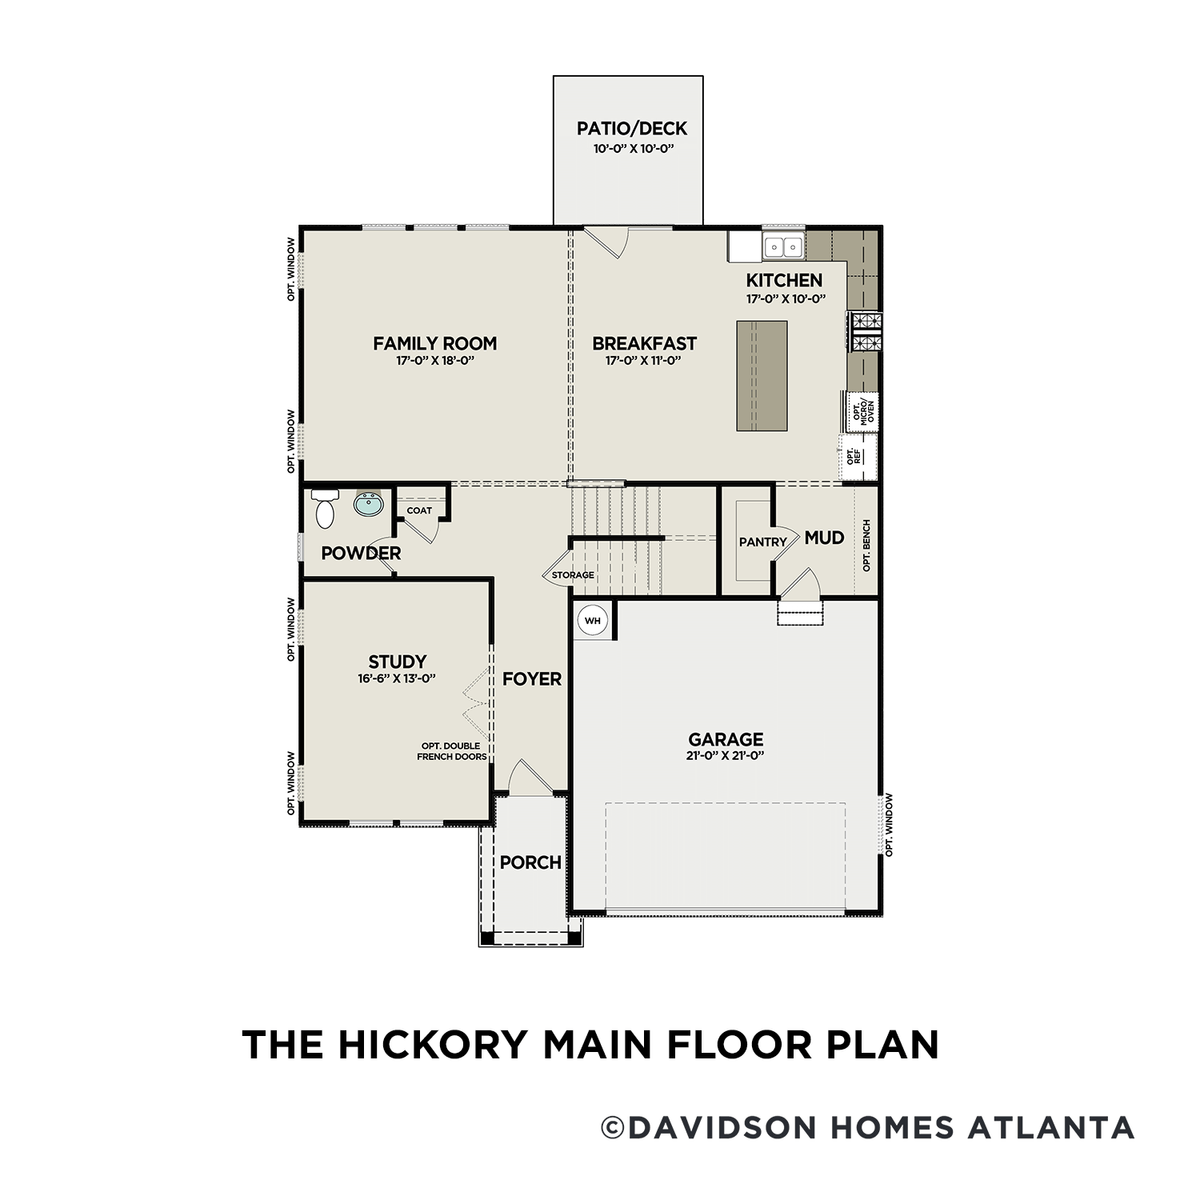 1 - The Hickory B floor plan layout for 165 Riverwood Drive in Davidson Homes' Riverwood community.